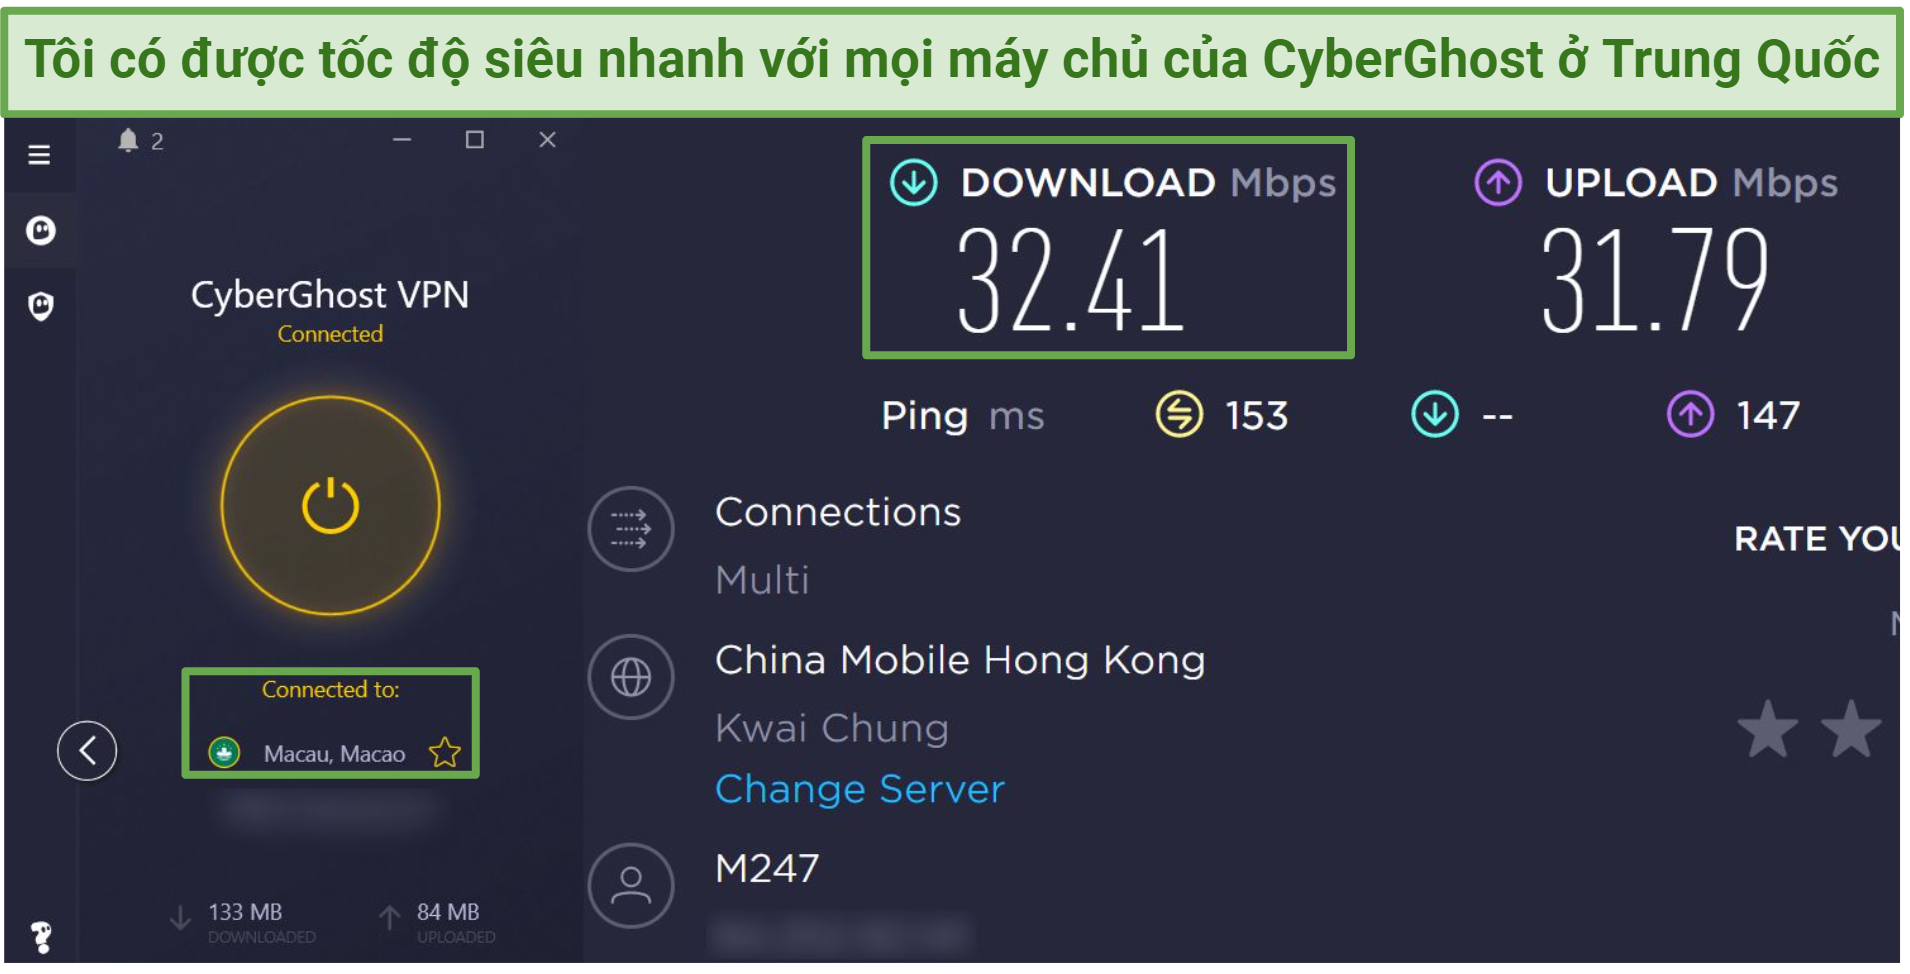 Screenshot of speed test results for a CyberGhost China VPN server